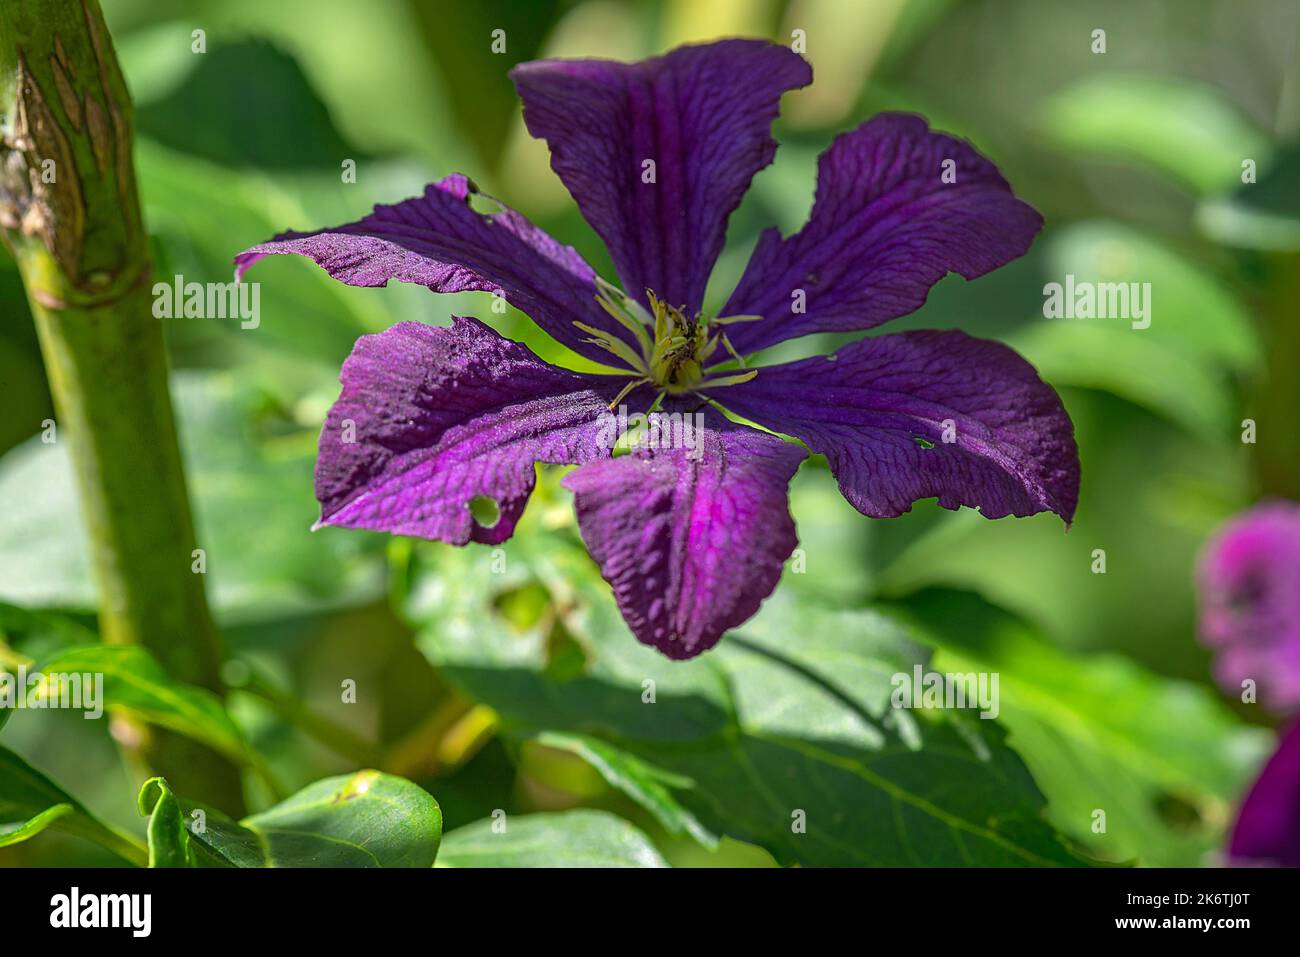 Virgin's bower (Clematis viticella), Bavaria, Germany Stock Photo